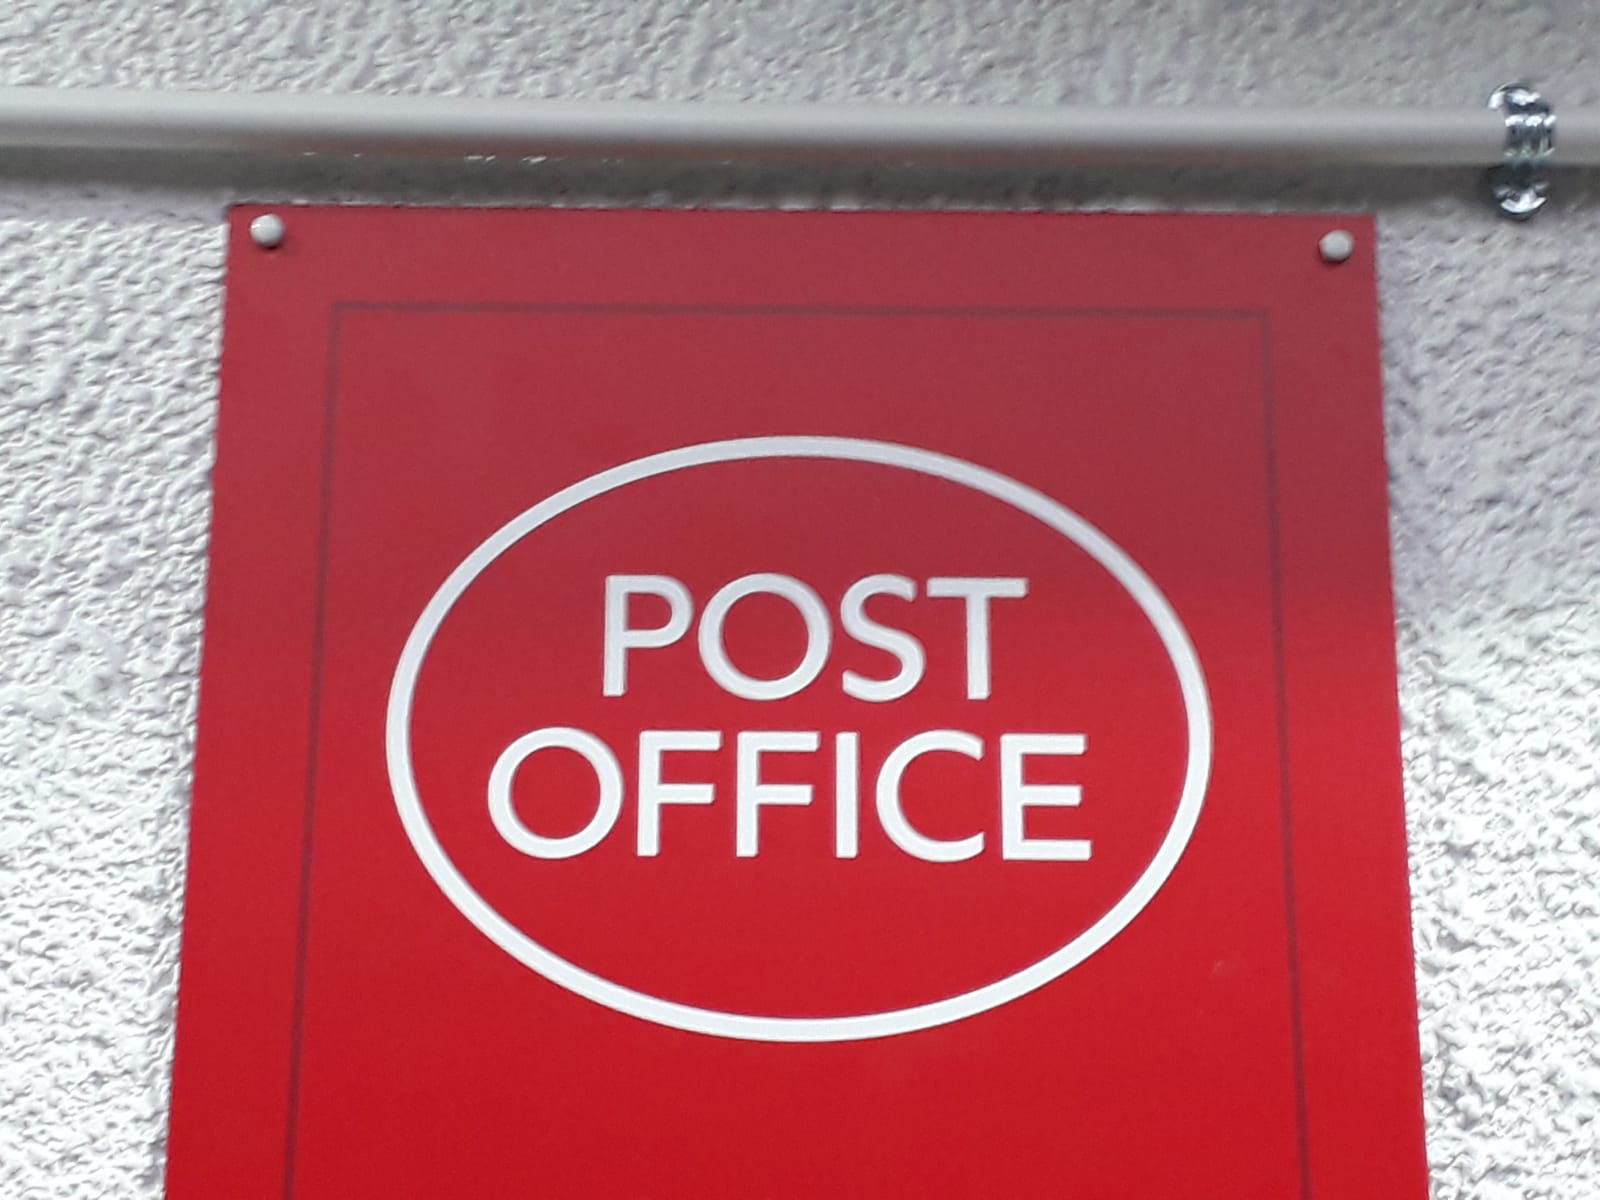 Post Office logo and sign